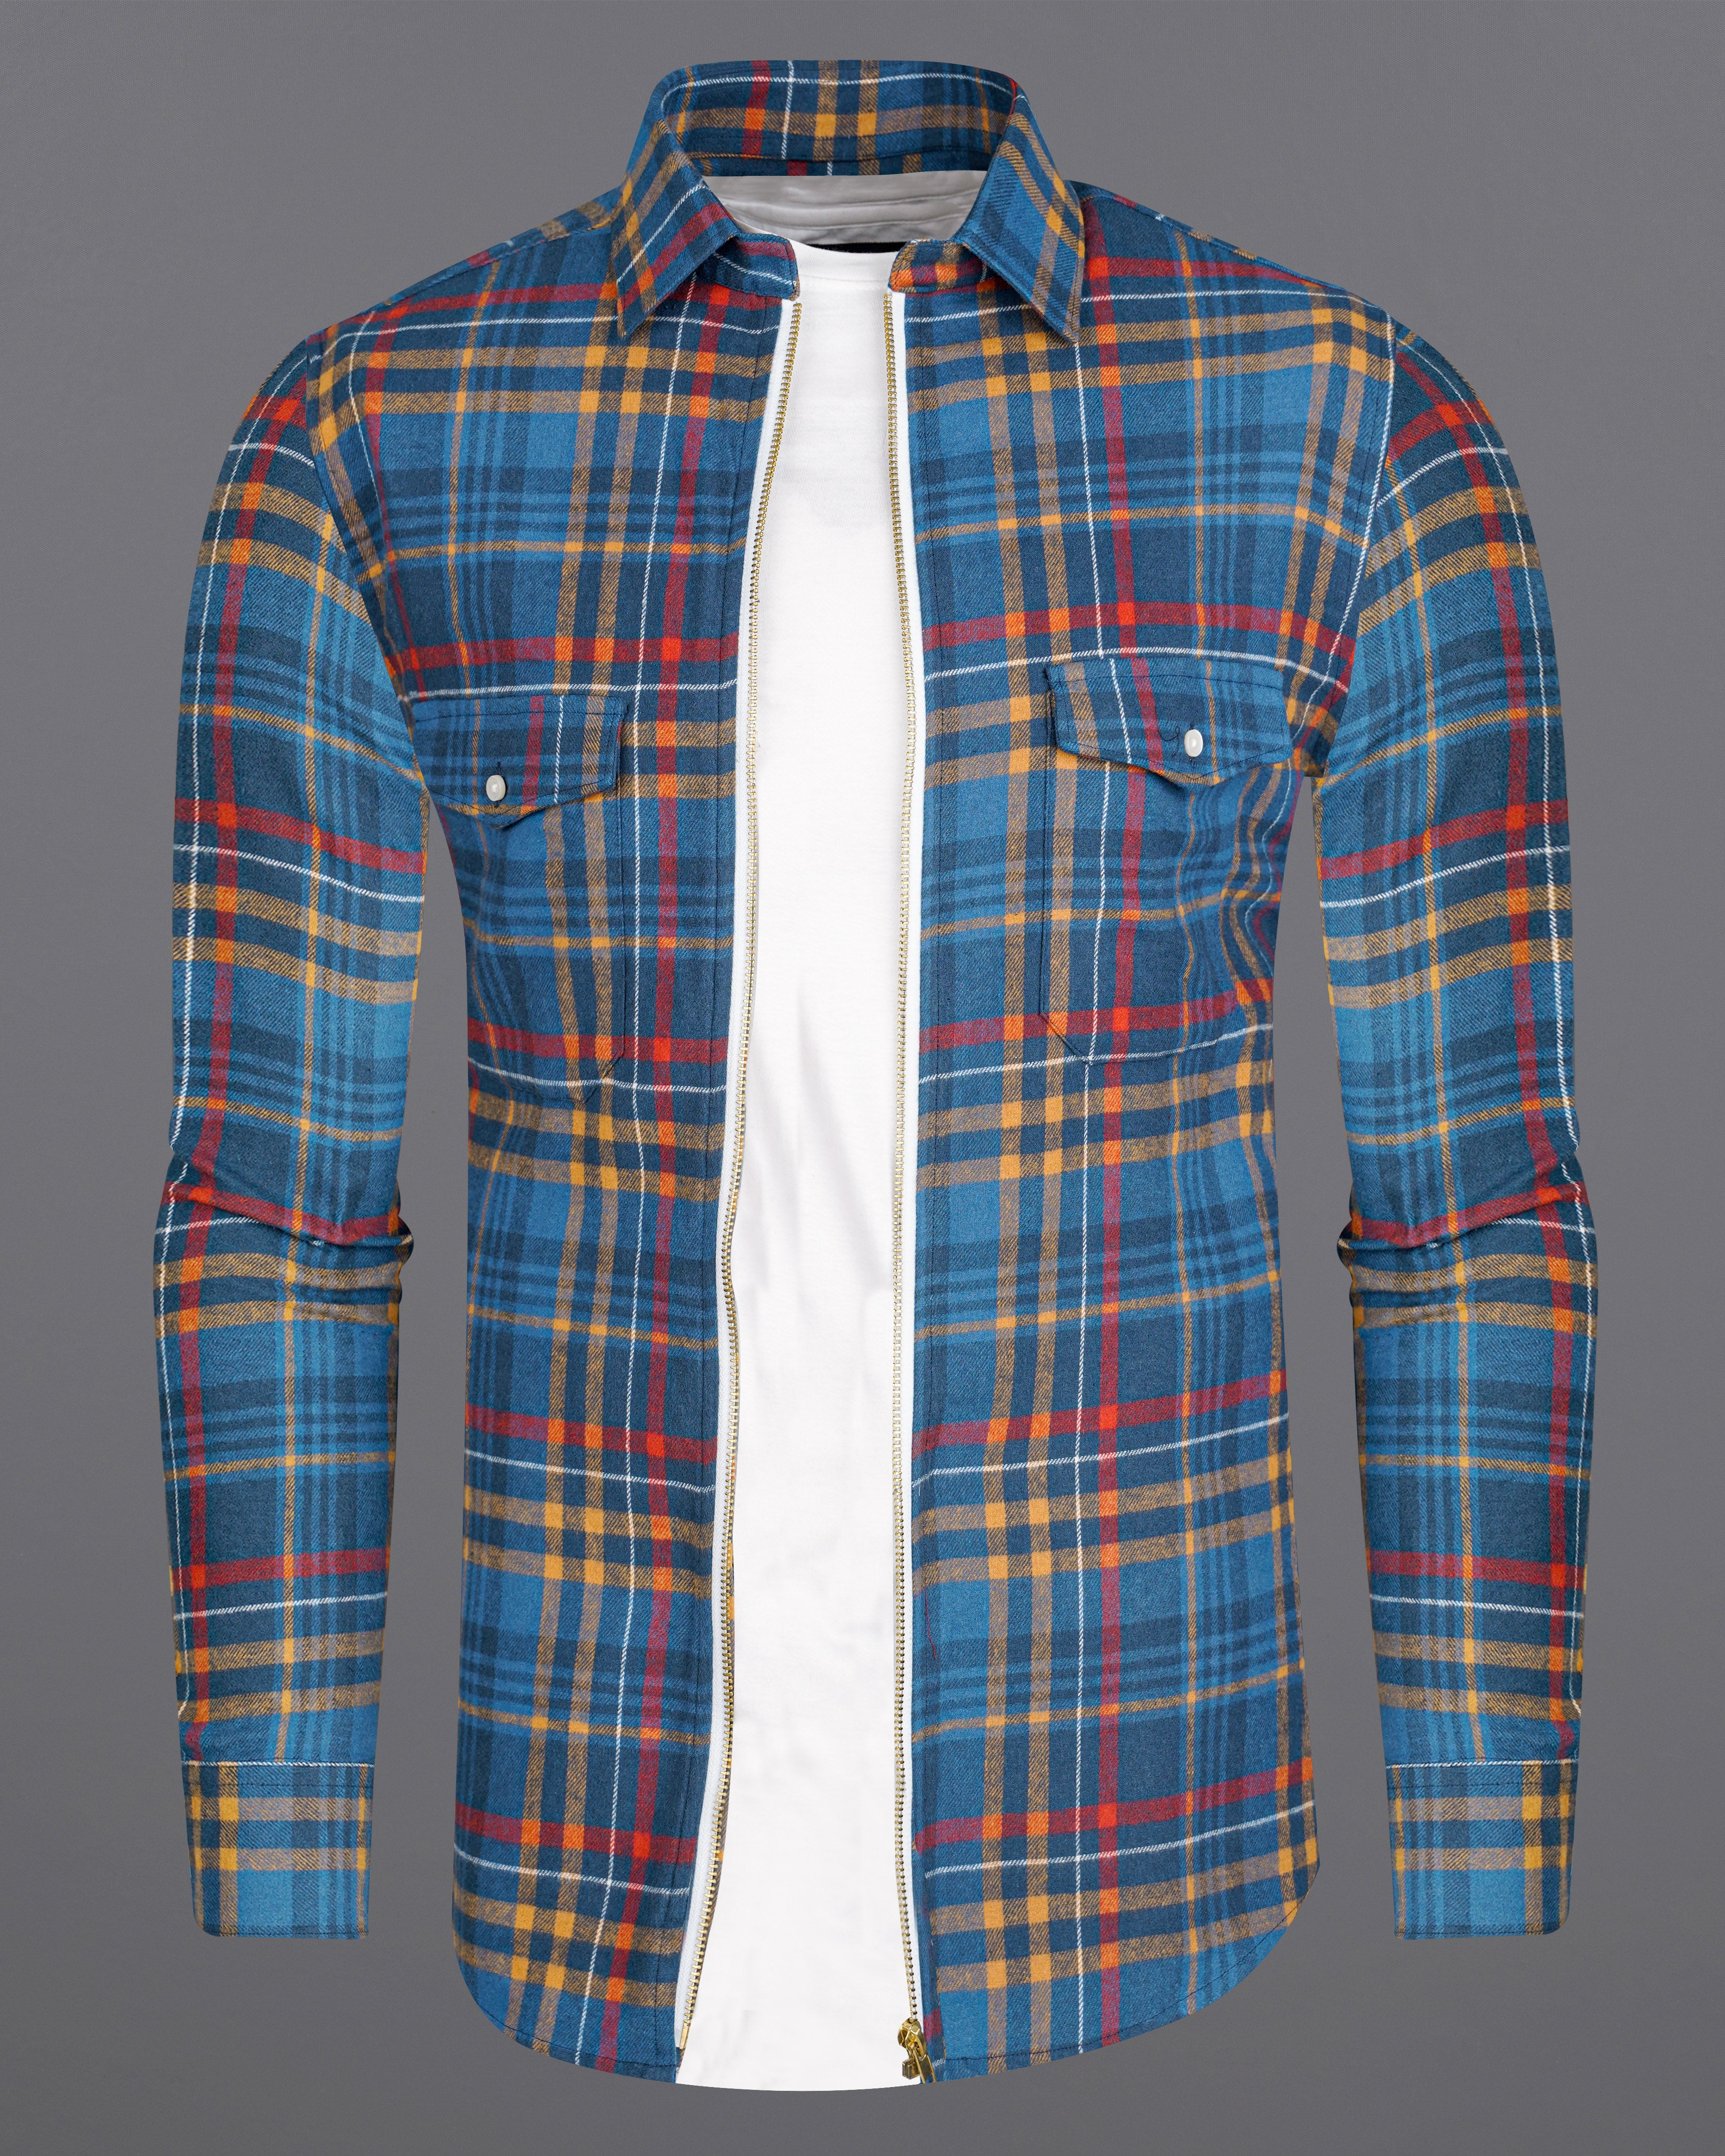 Marino Blue with Persian Yellow and Stiletto Red Plaid Flannel Designer Overshirt with Zipper Closure 8445-OS-FP-38,8445-OS-FP-H-38,8445-OS-FP-39,8445-OS-FP-H-39,8445-OS-FP-40,8445-OS-FP-H-40,8445-OS-FP-42,8445-OS-FP-H-42,8445-OS-FP-44,8445-OS-FP-H-44,8445-OS-FP-46,8445-OS-FP-H-46,8445-OS-FP-48,8445-OS-FP-H-48,8445-OS-FP-50,8445-OS-FP-H-50,8445-OS-FP-52,8445-OS-FP-H-52